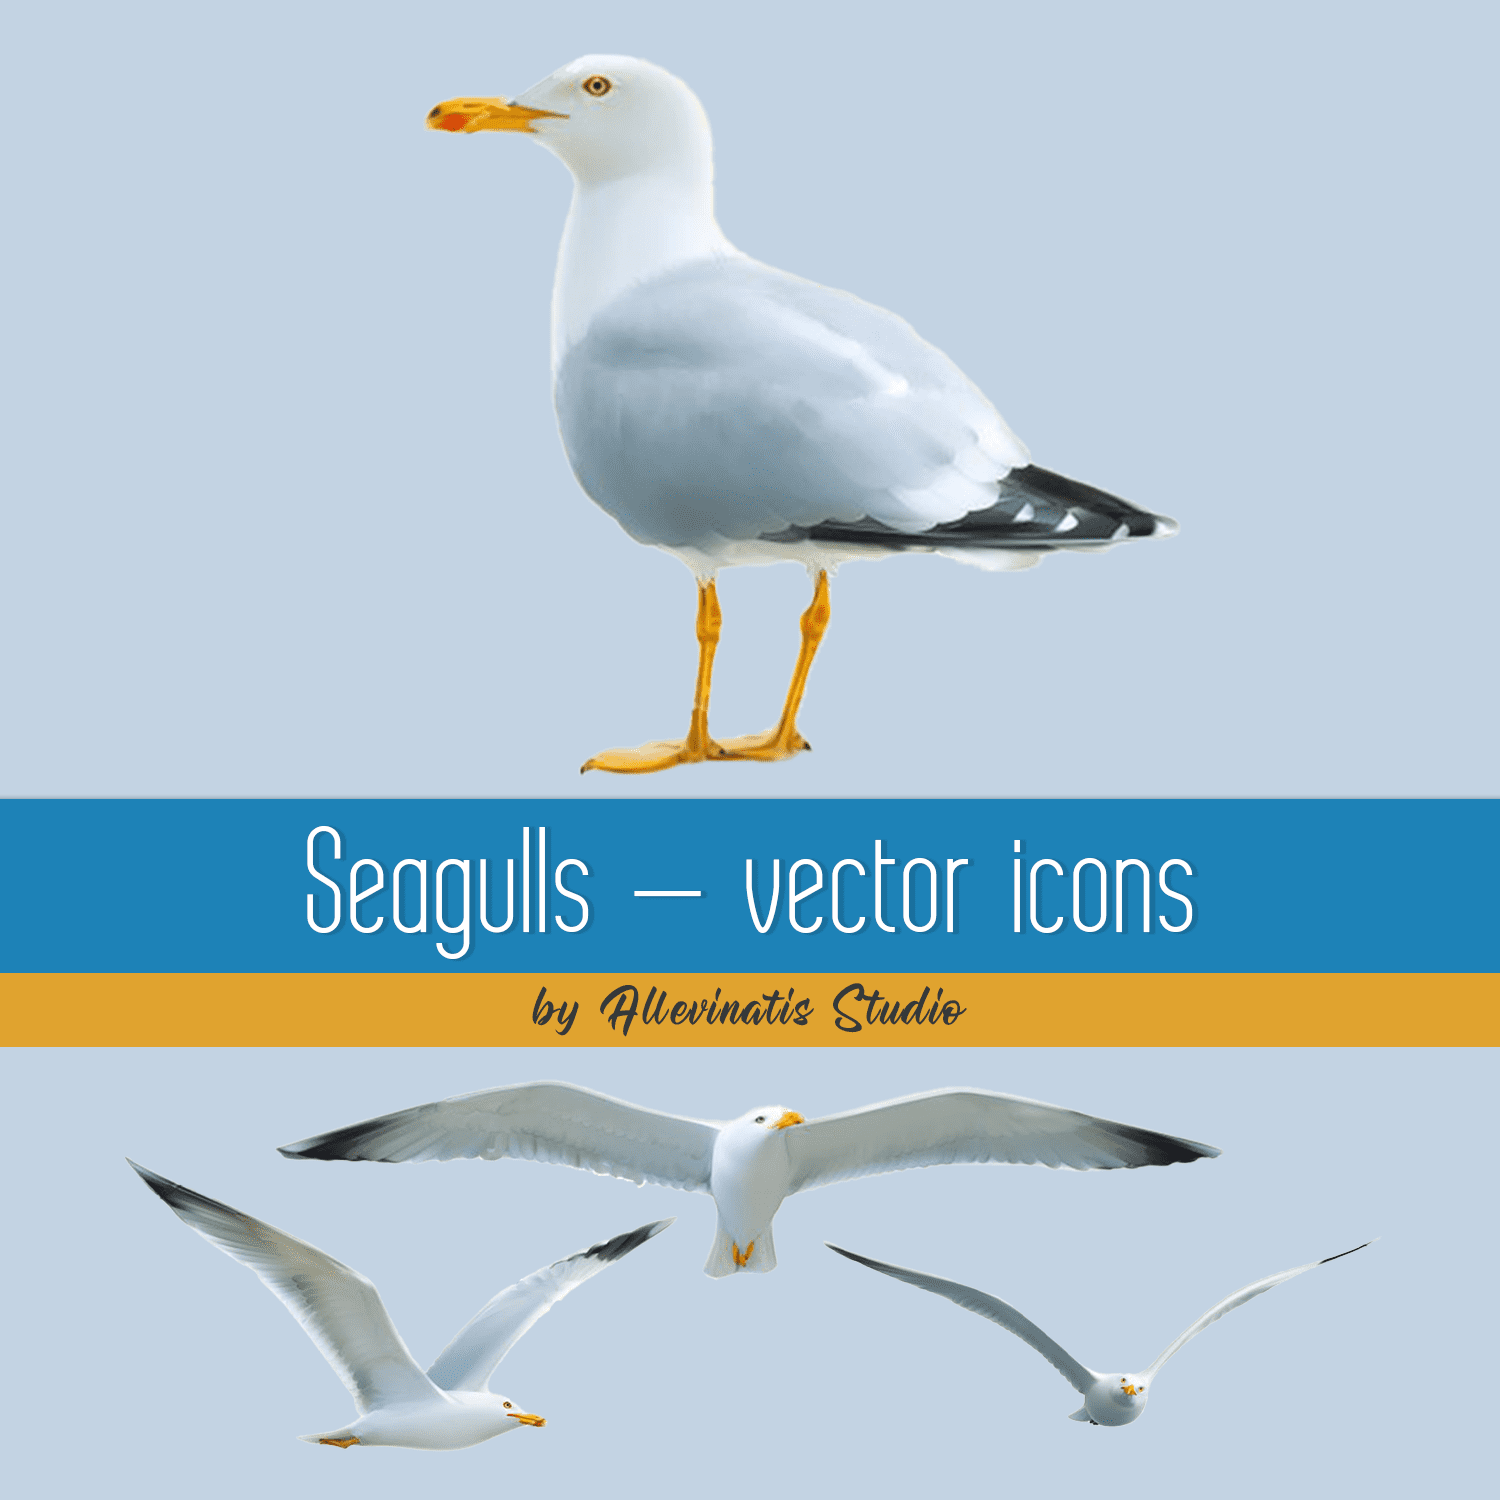 Seagulls, vector icons.